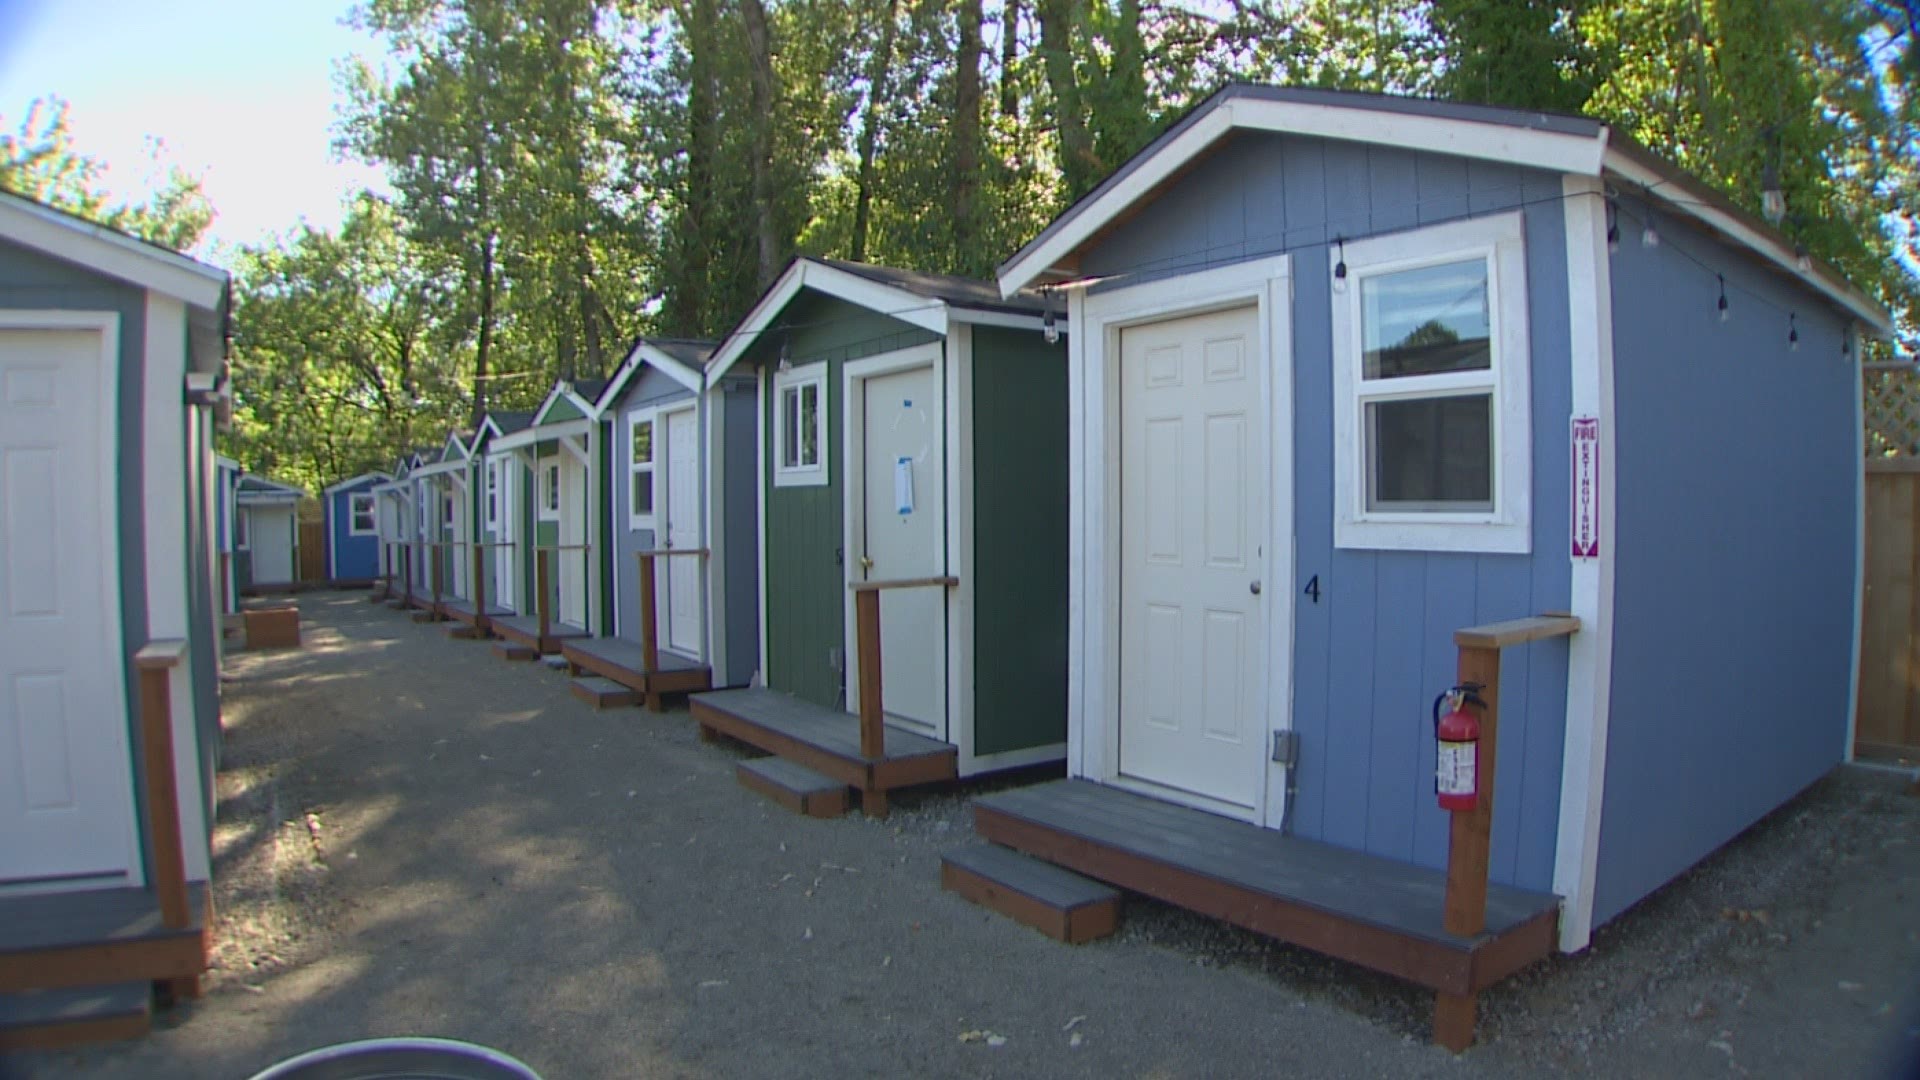 A Skyway church has offered up its vacant land to help house more than 30 people. The new tiny home village is the first in King County outside of Seattle.